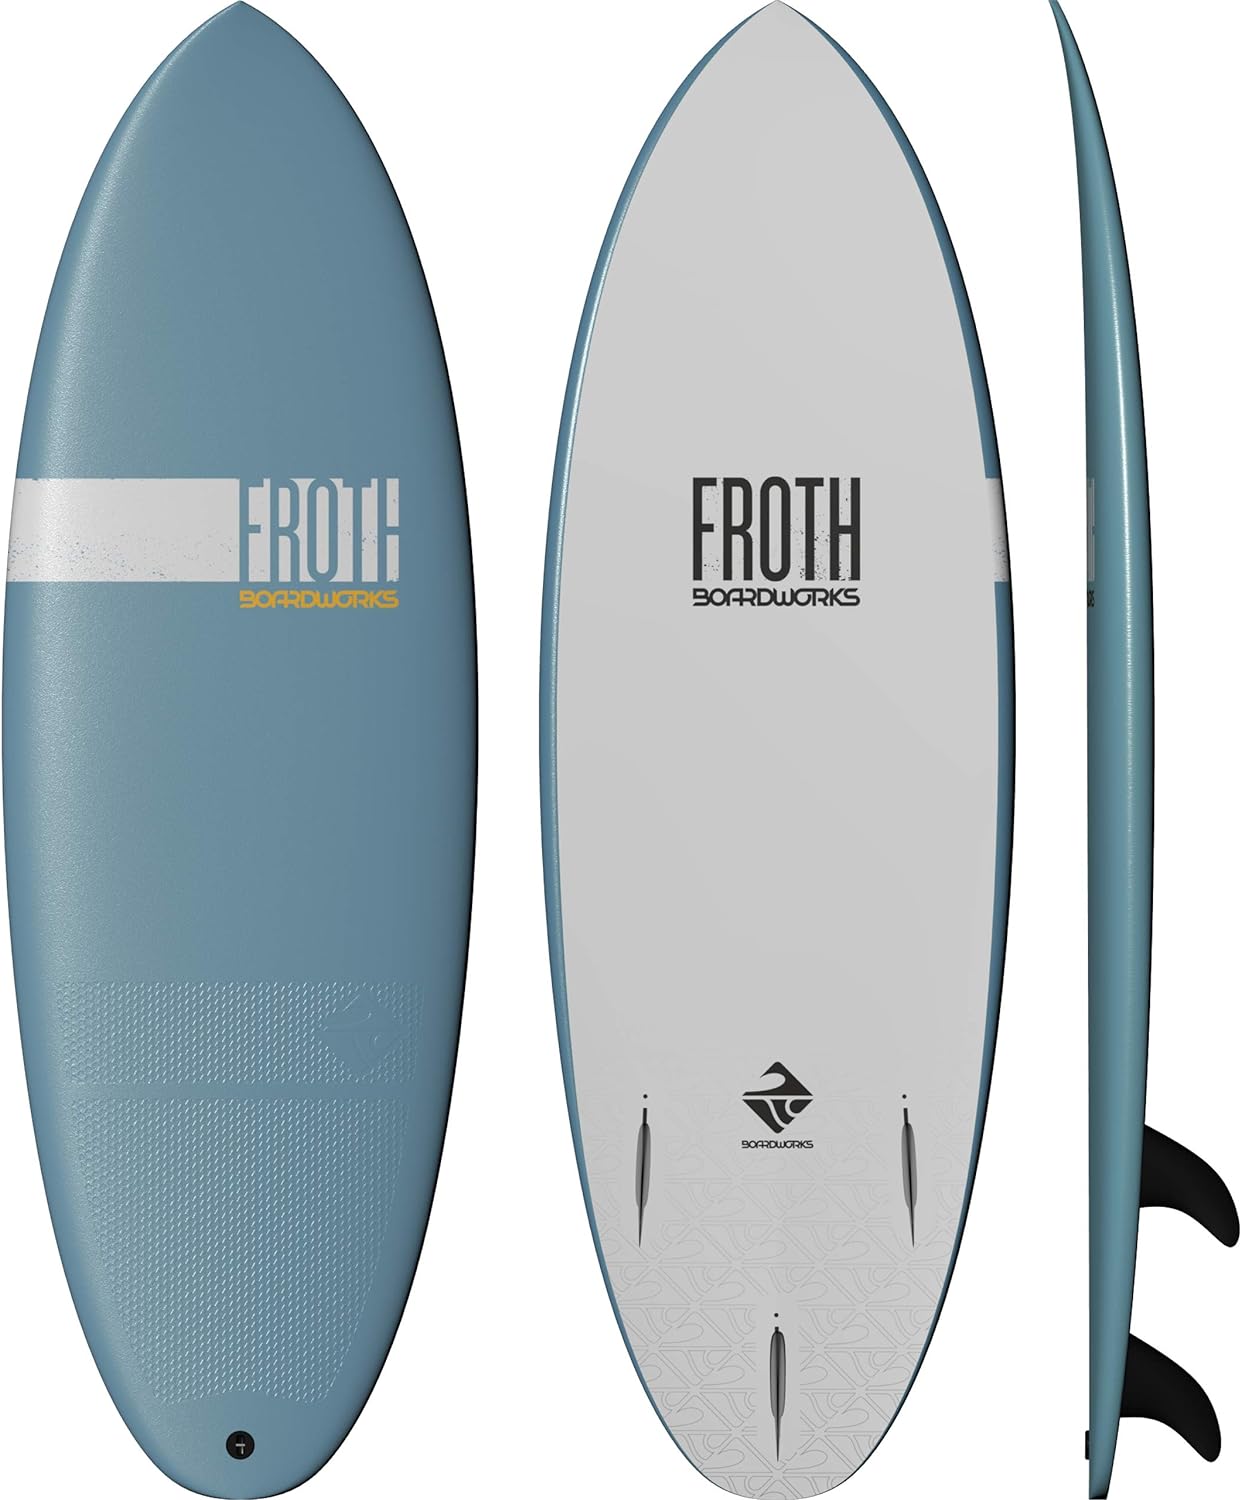 A blue and white Froth! surfboard designed for beginners to catch smaller waves, featuring the word "farth" on it by Boardworks.